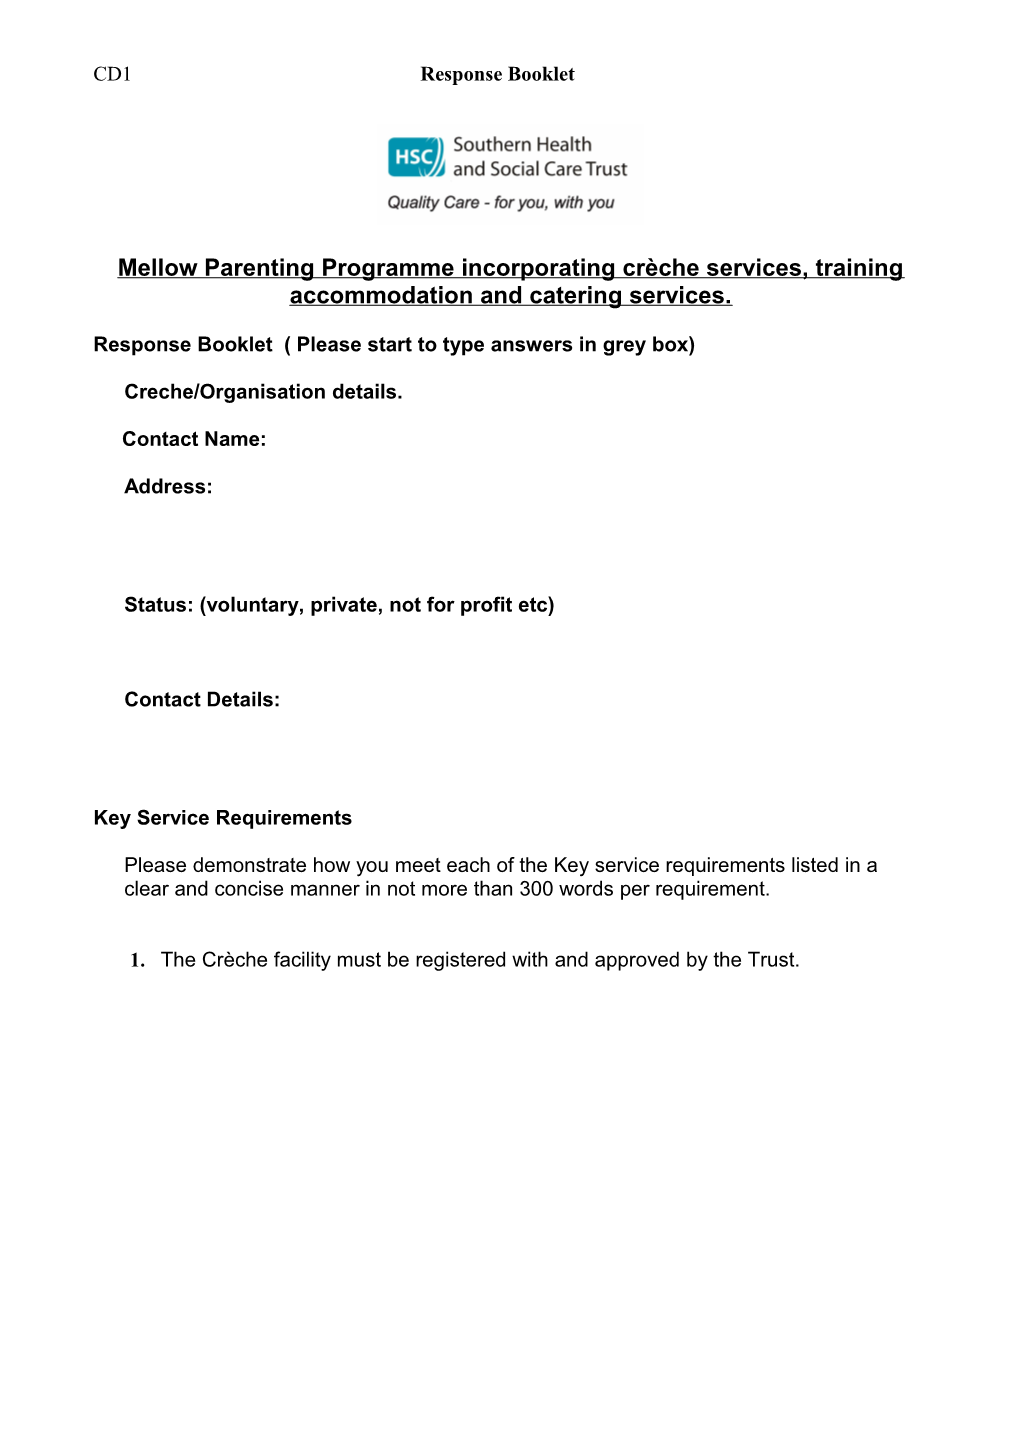 Mellow Parenting Programme Incorporating Crèche Services, Training Accommodation and Catering